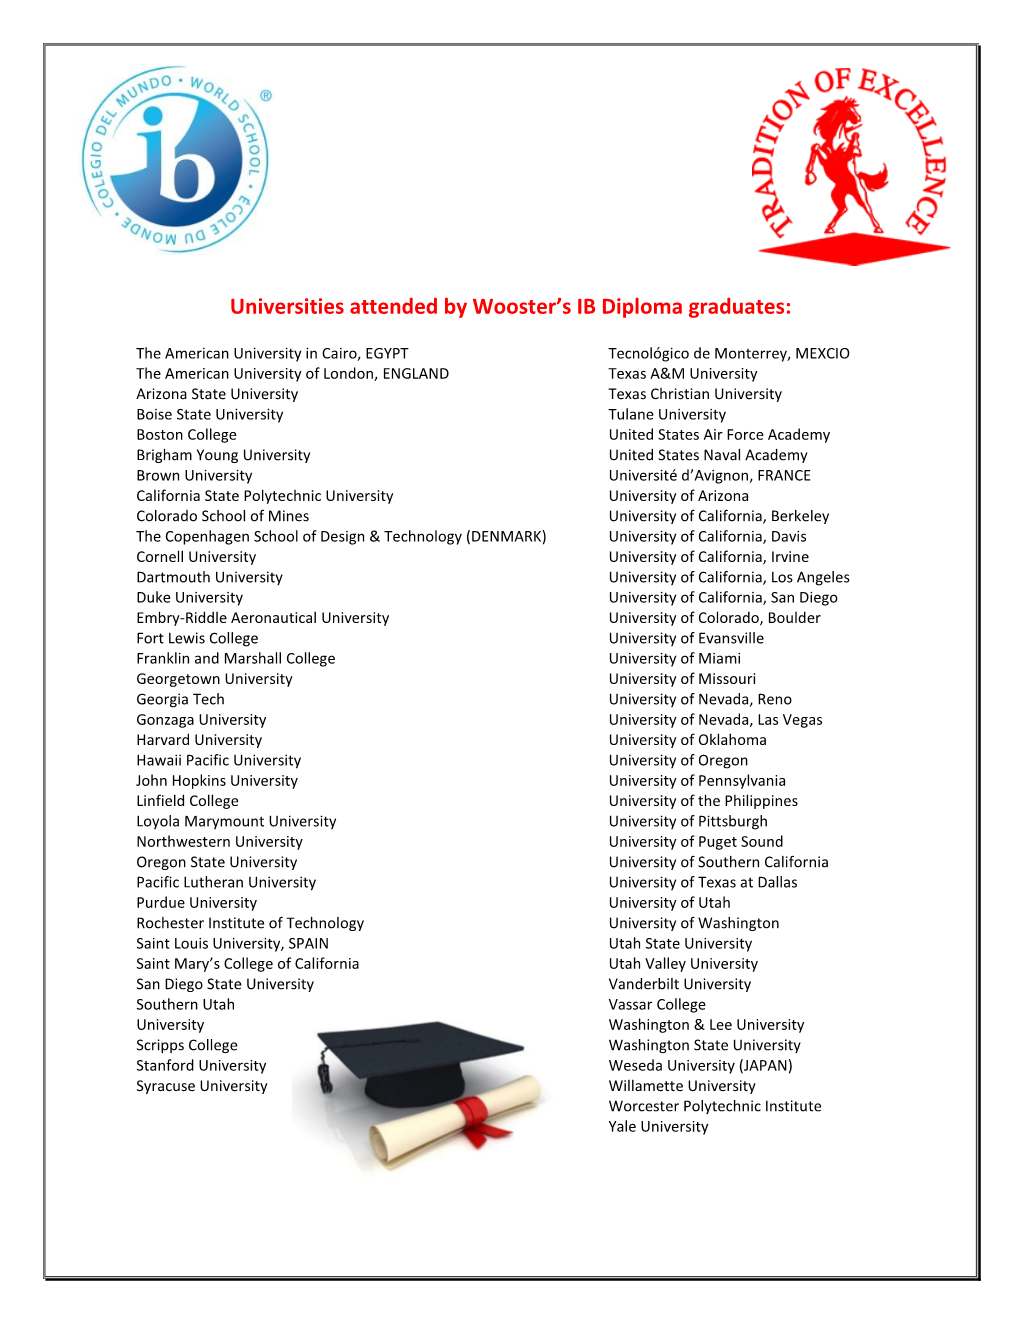 Universities Attended by Wooster’S IB Diploma Graduates